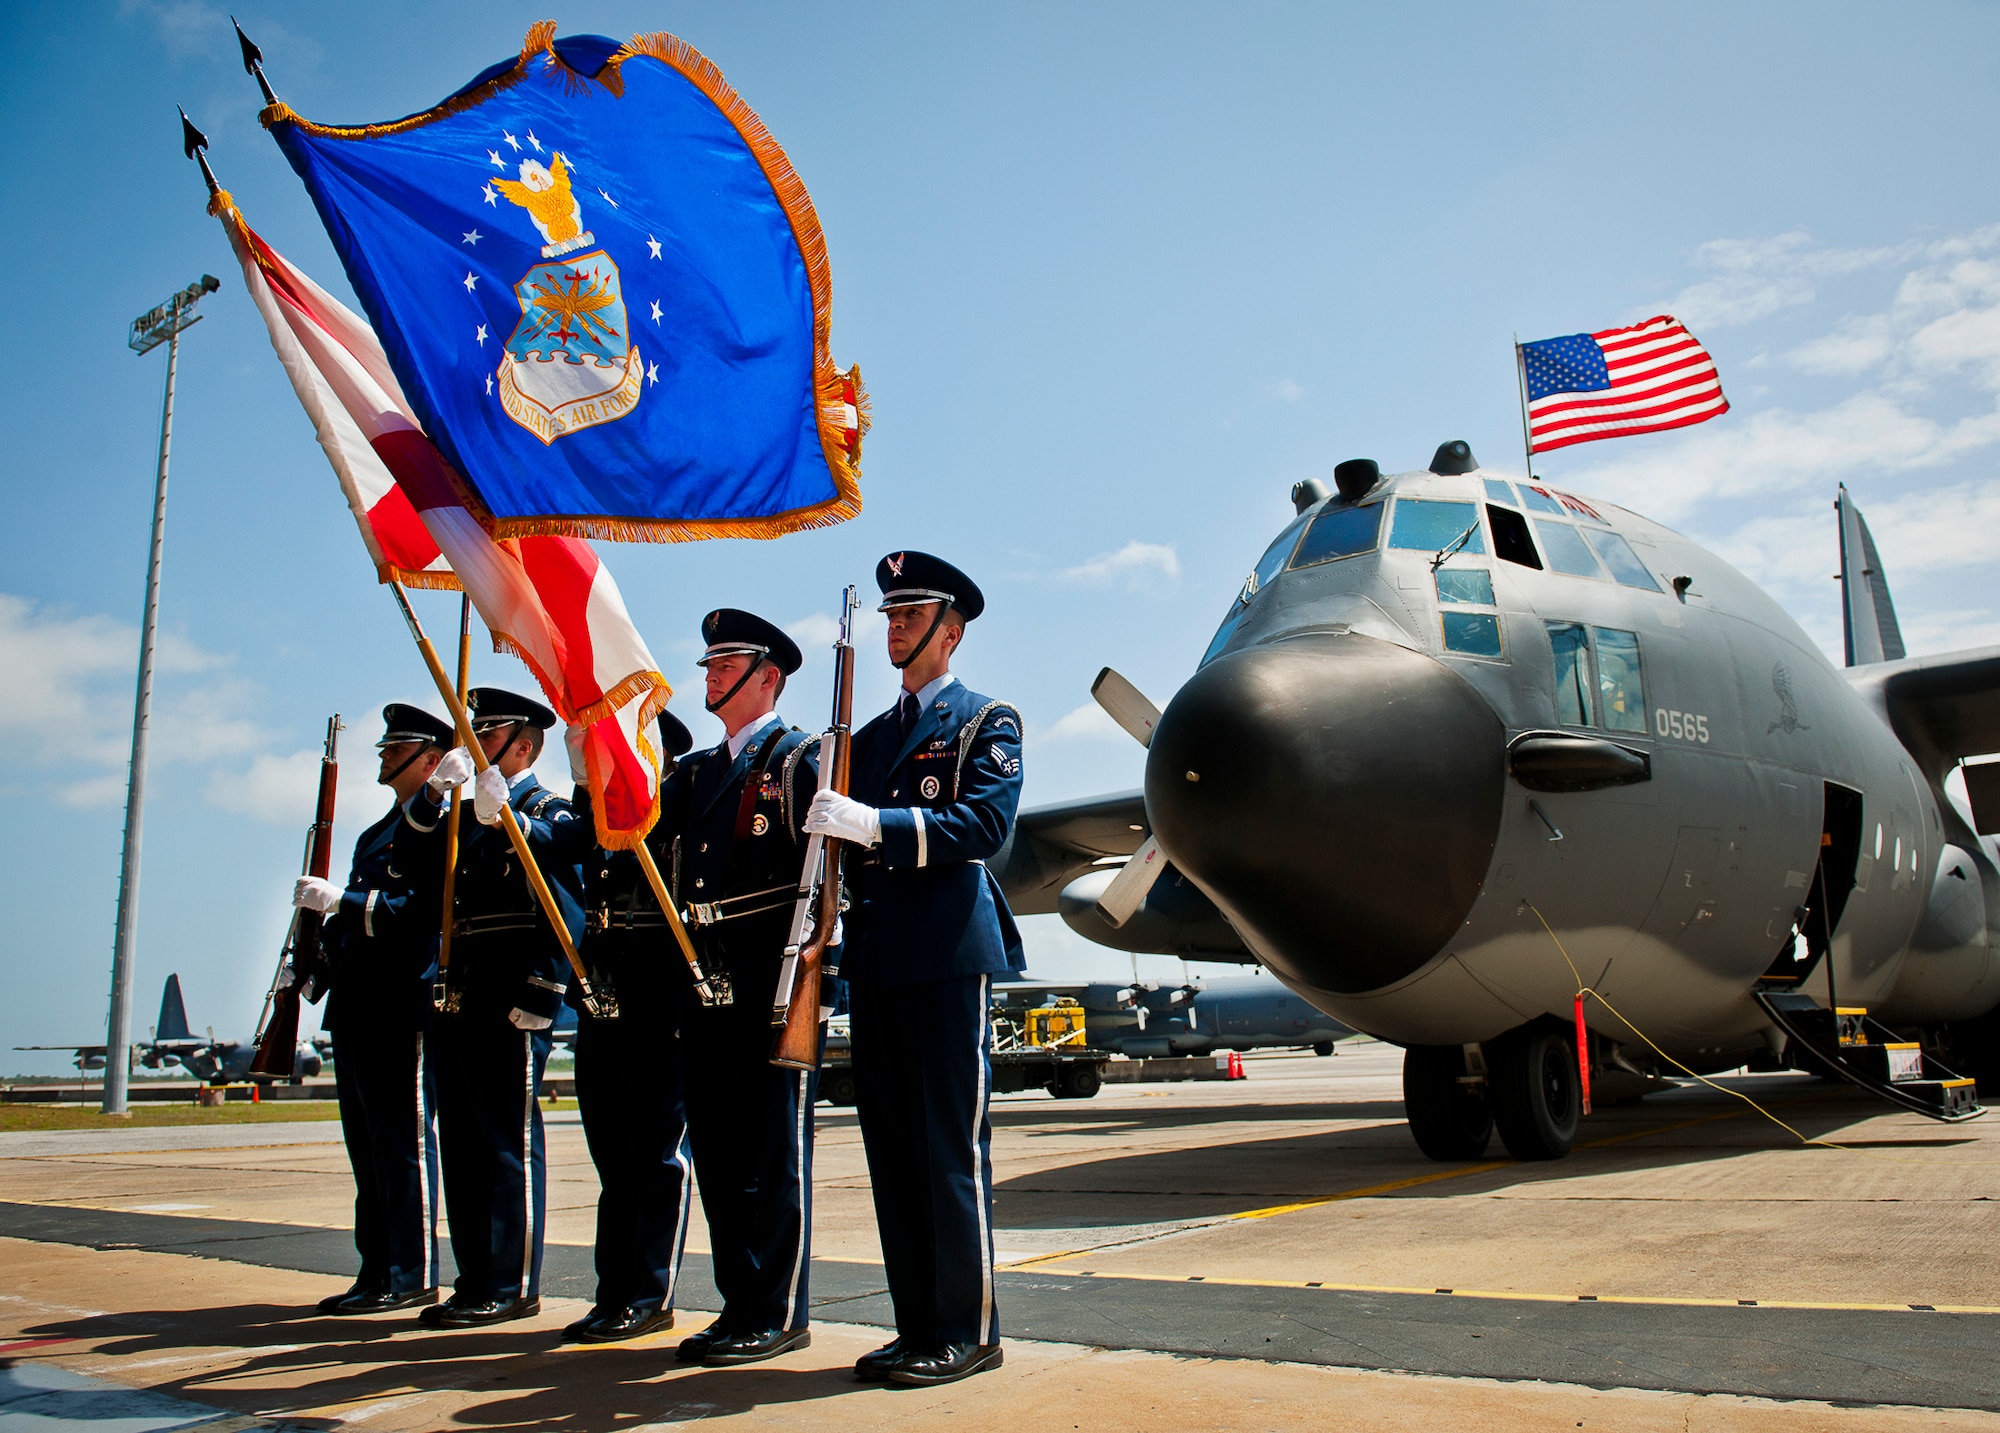 The Eglin Honor Guard presents the colors in the shadow of an MC-130E Combat Talon I during its retirement ceremony at Duke Field, Fla., April 25.  Aircrew, maintainers and many others turned out to remember and bid farewell to the Talon I on its official retirement from the Air Force.  The last five Talons, located at Duke Field, will be delivered to the “boneyard” at Davis-Monthan Air Force Base, N.M., by mid-May 2013.  (U.S. Air Force photo/Tech. Sgt. Samuel King Jr.)